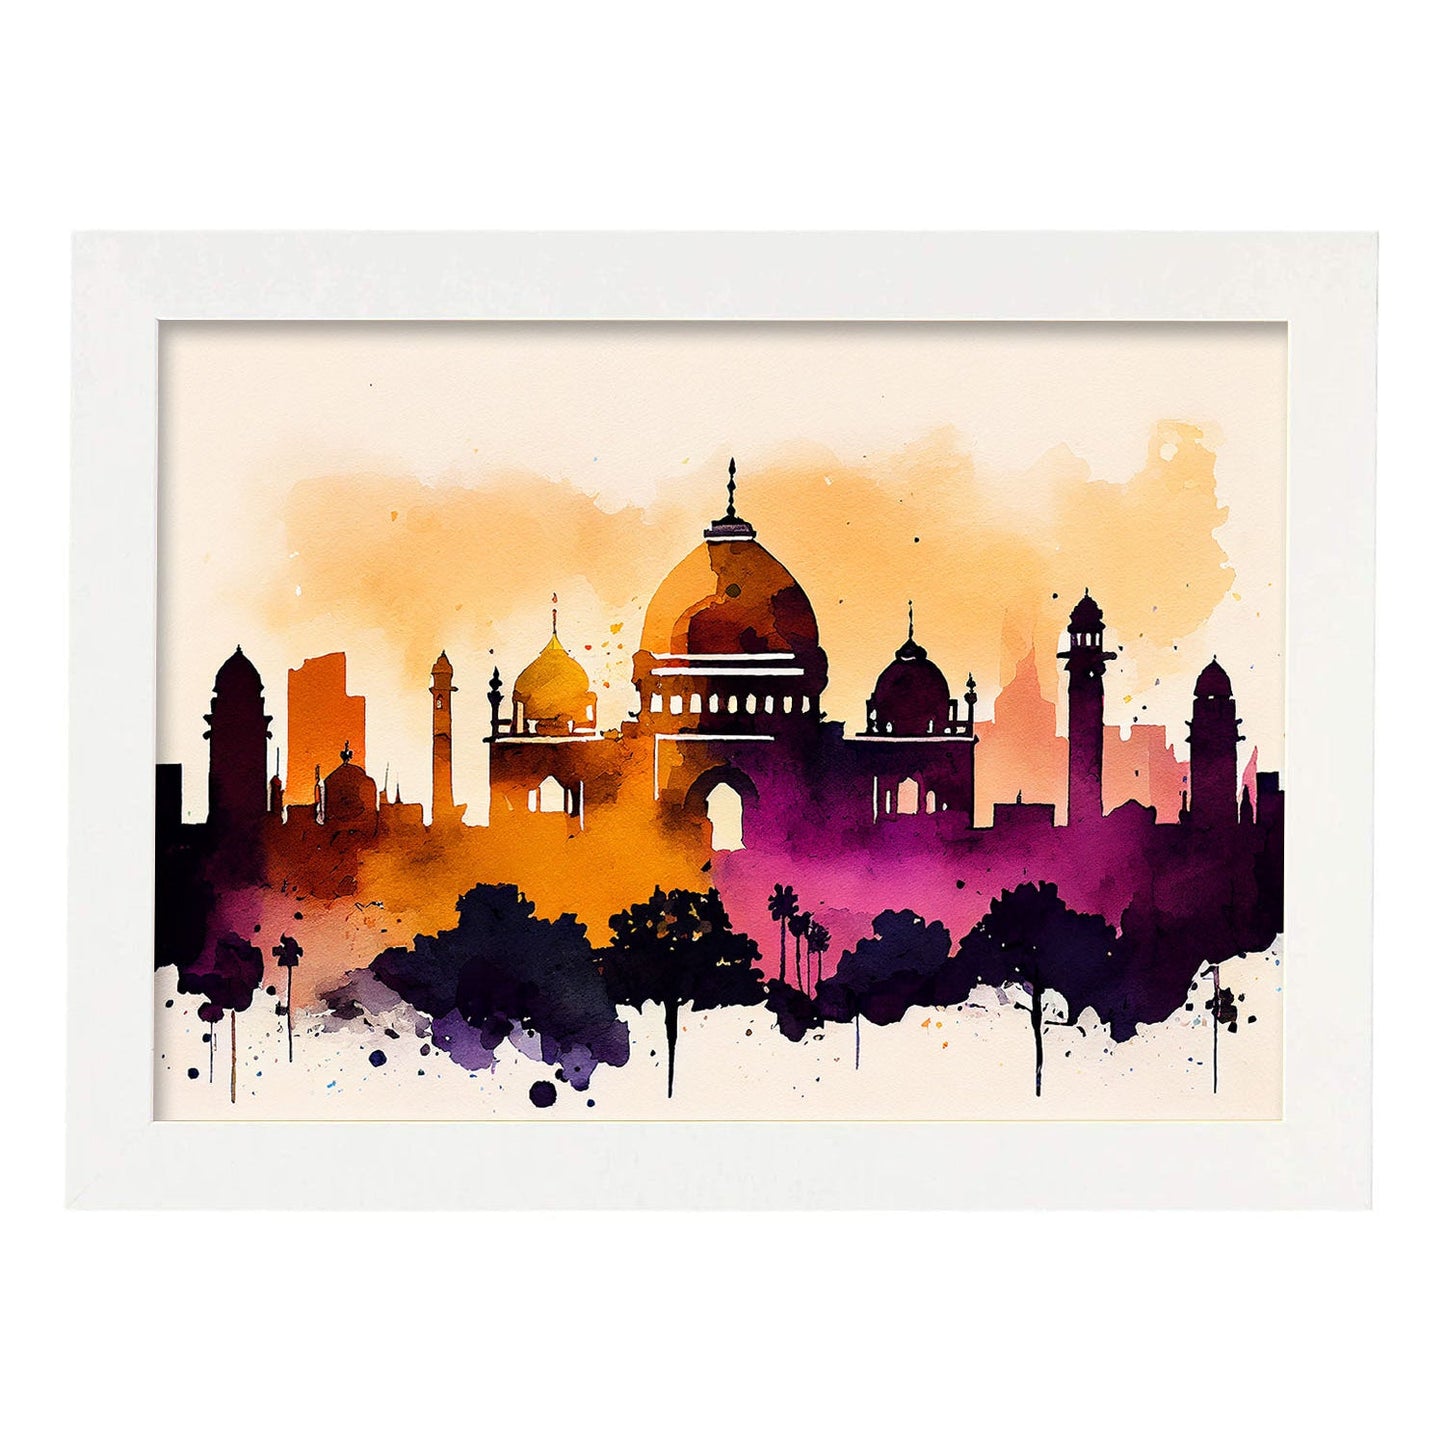 Nacnic watercolor of a skyline of the city of Delhi. Aesthetic Wall Art Prints for Bedroom or Living Room Design.-Artwork-Nacnic-A4-Marco Blanco-Nacnic Estudio SL